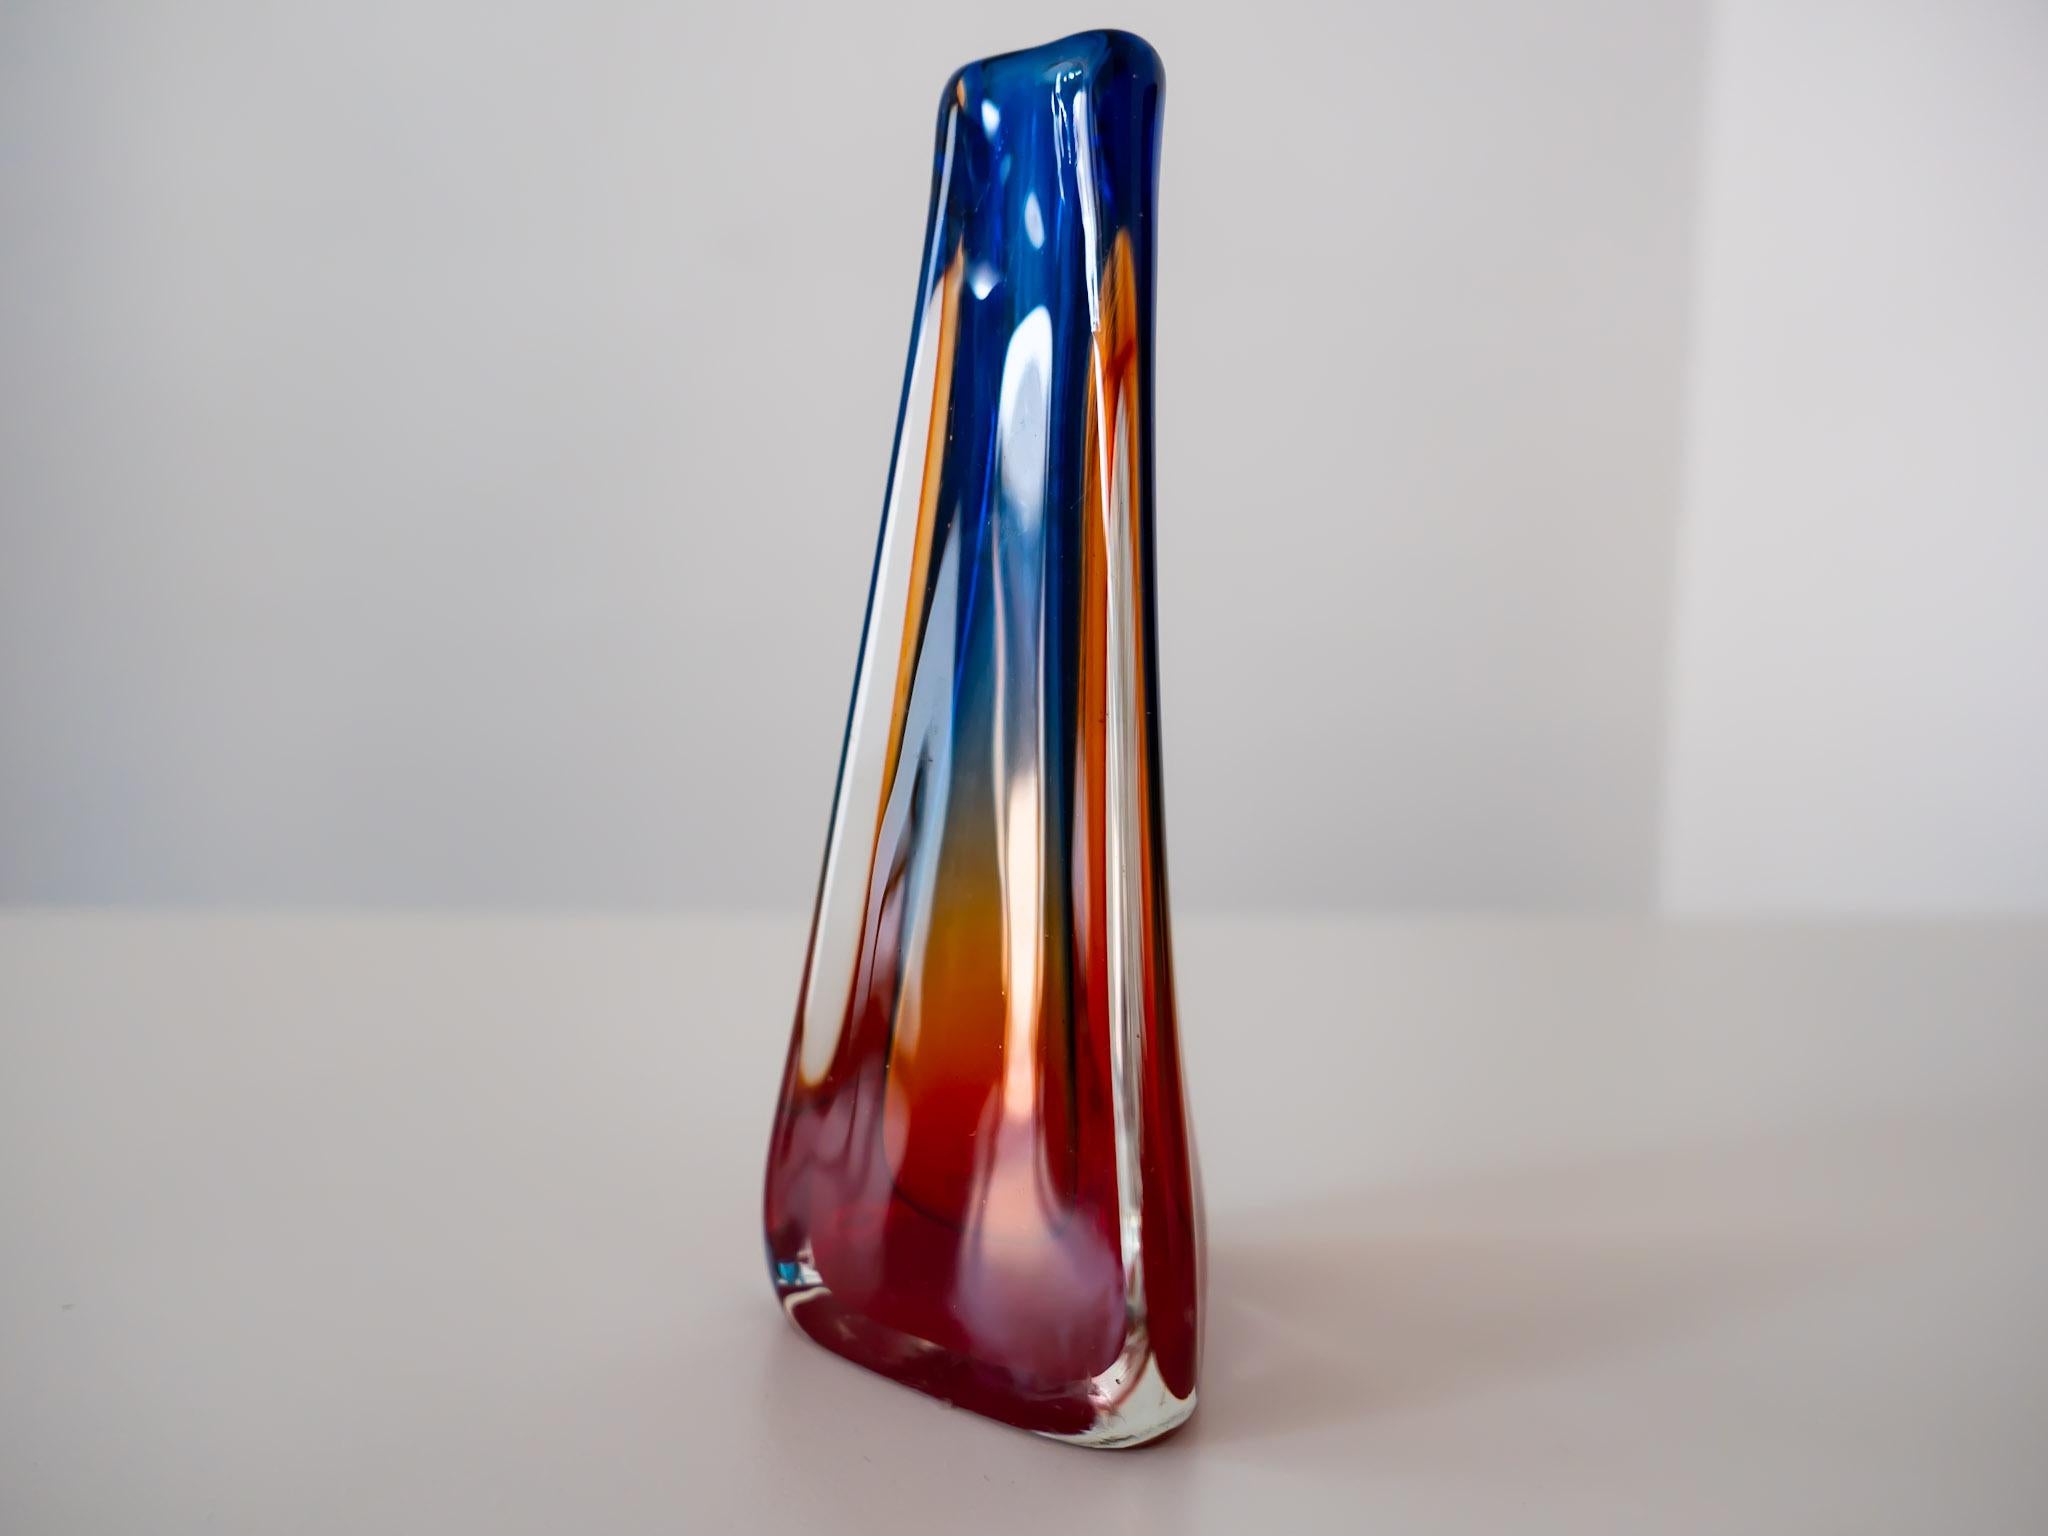 Colorful Murano Glass Sommerso vase for Maestri Muranesi, Italy 1960s.

Colourful Murano Glass vase produced by the Italian manufacturer Maestri Vetrai Muranesi in the 1960s. This beautiful vase in the shades of a strong blue, orange and red has a